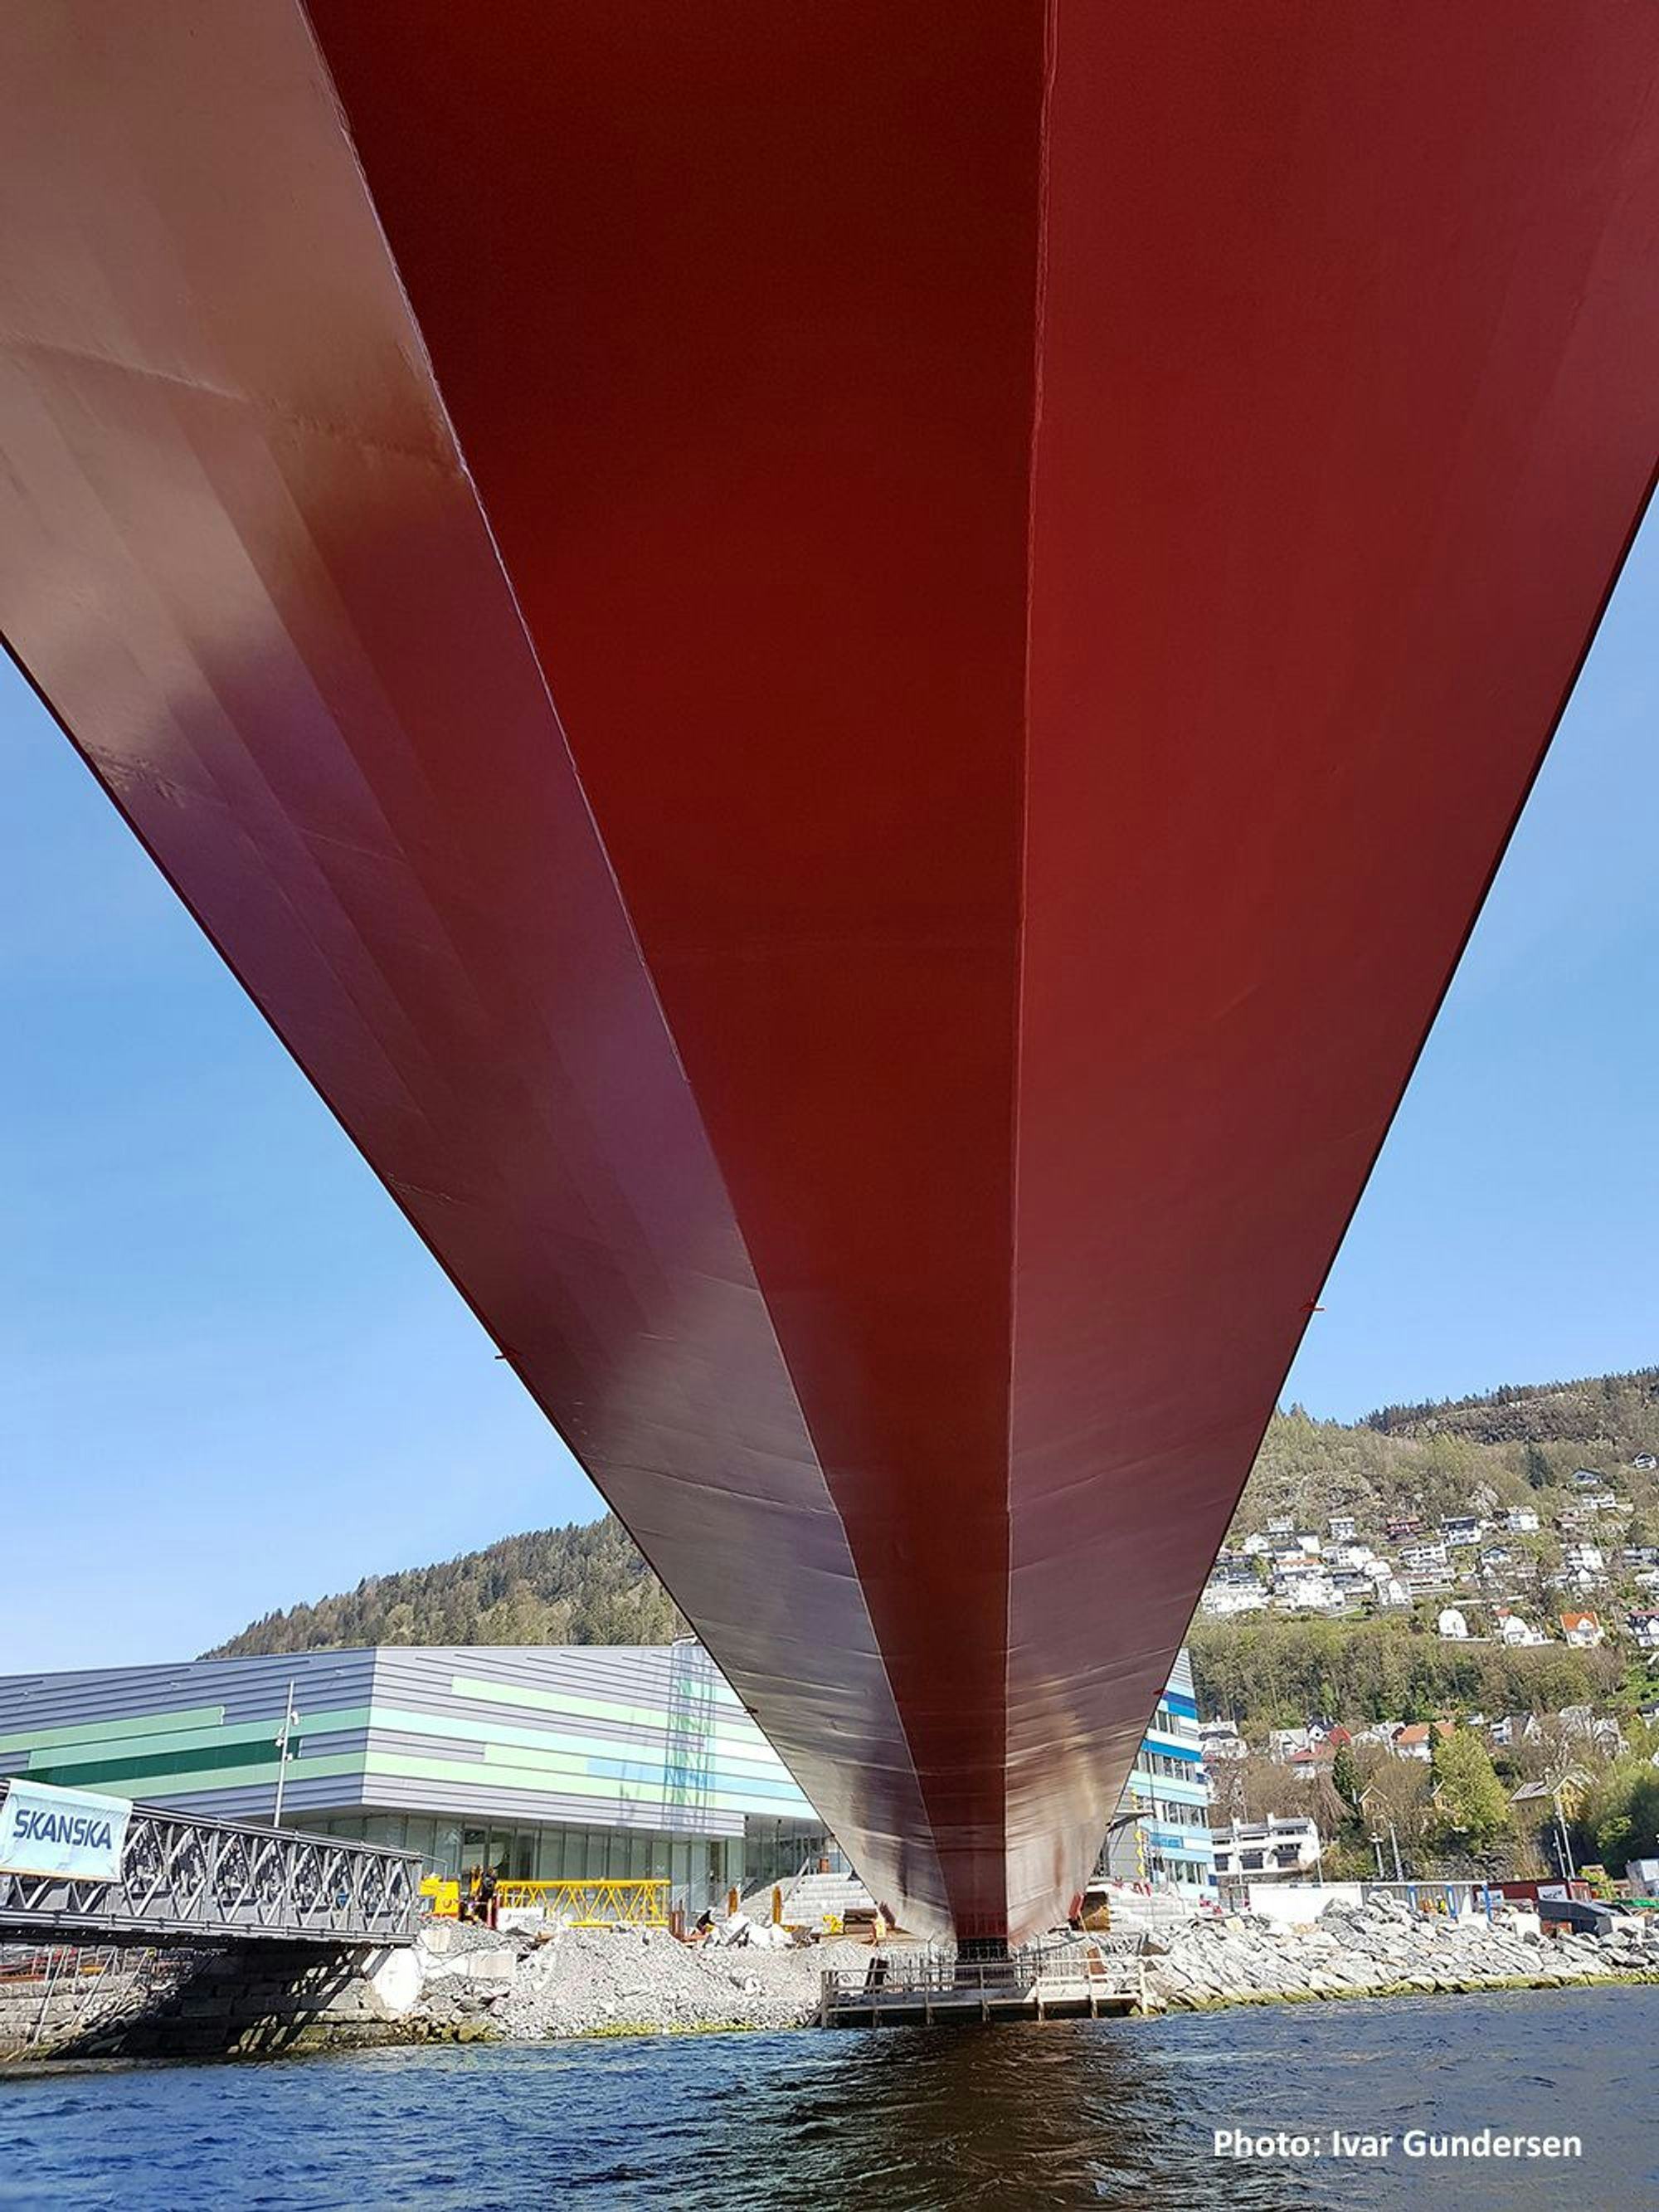 The underside of a large red bridge